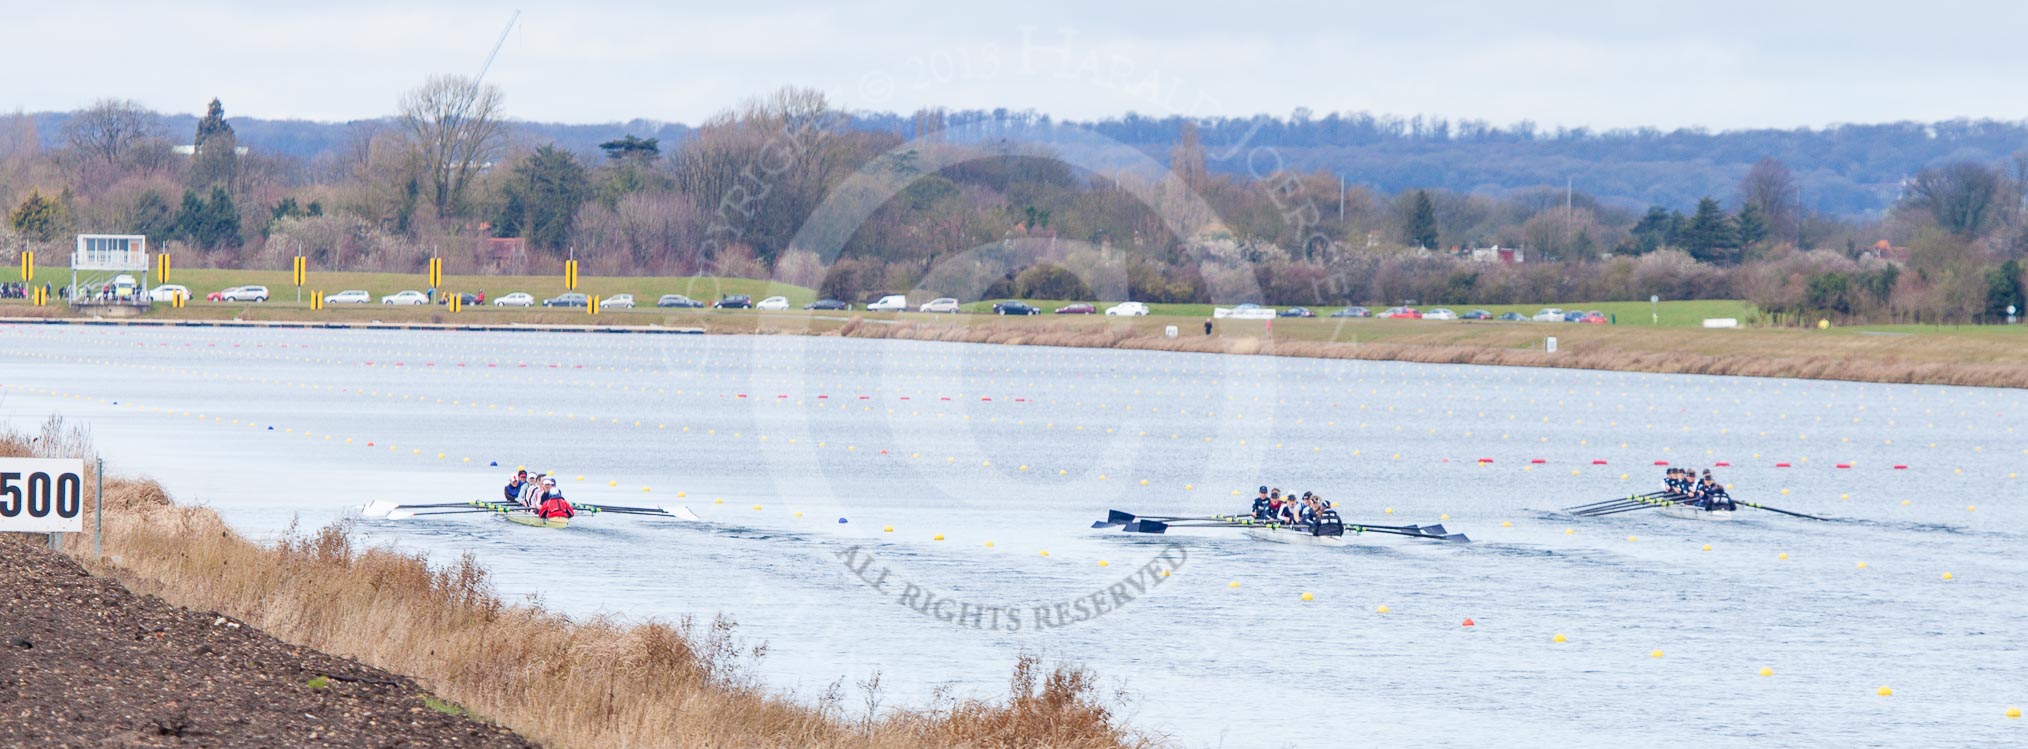 The Boat Race season 2013 - fixture OUWBC vs Olympians: Racing down Dorney Lake, on the left the Olympians Eight, in the middle the OUWBC Blue Boat, on the right OUWBC reserve boat Osiris..
Dorney Lake,
Dorney, Windsor,
Buckinghamshire,
United Kingdom,
on 16 March 2013 at 11:37, image #88